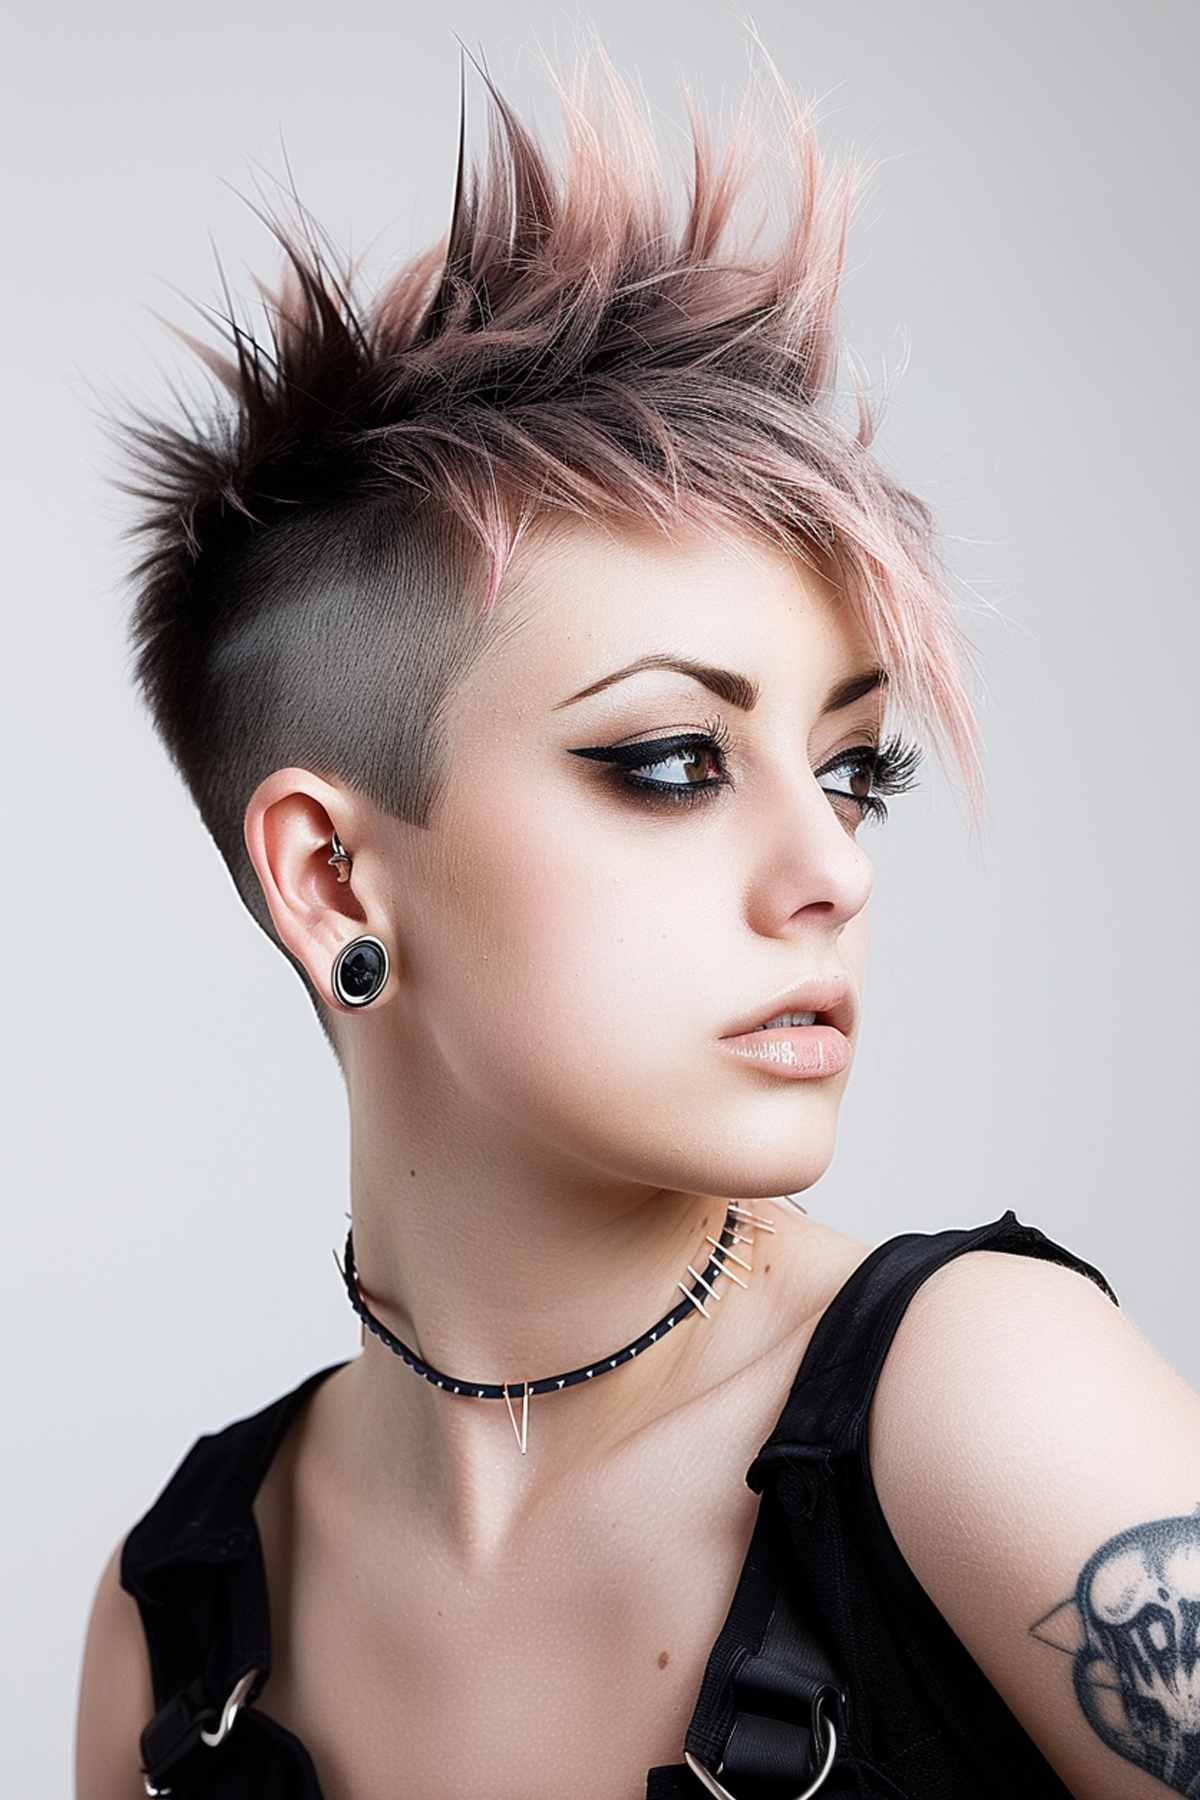 Punk pixie cut with bold undercut, featuring spiked hair with dark roots and pink tips, ideal for expressing individuality.